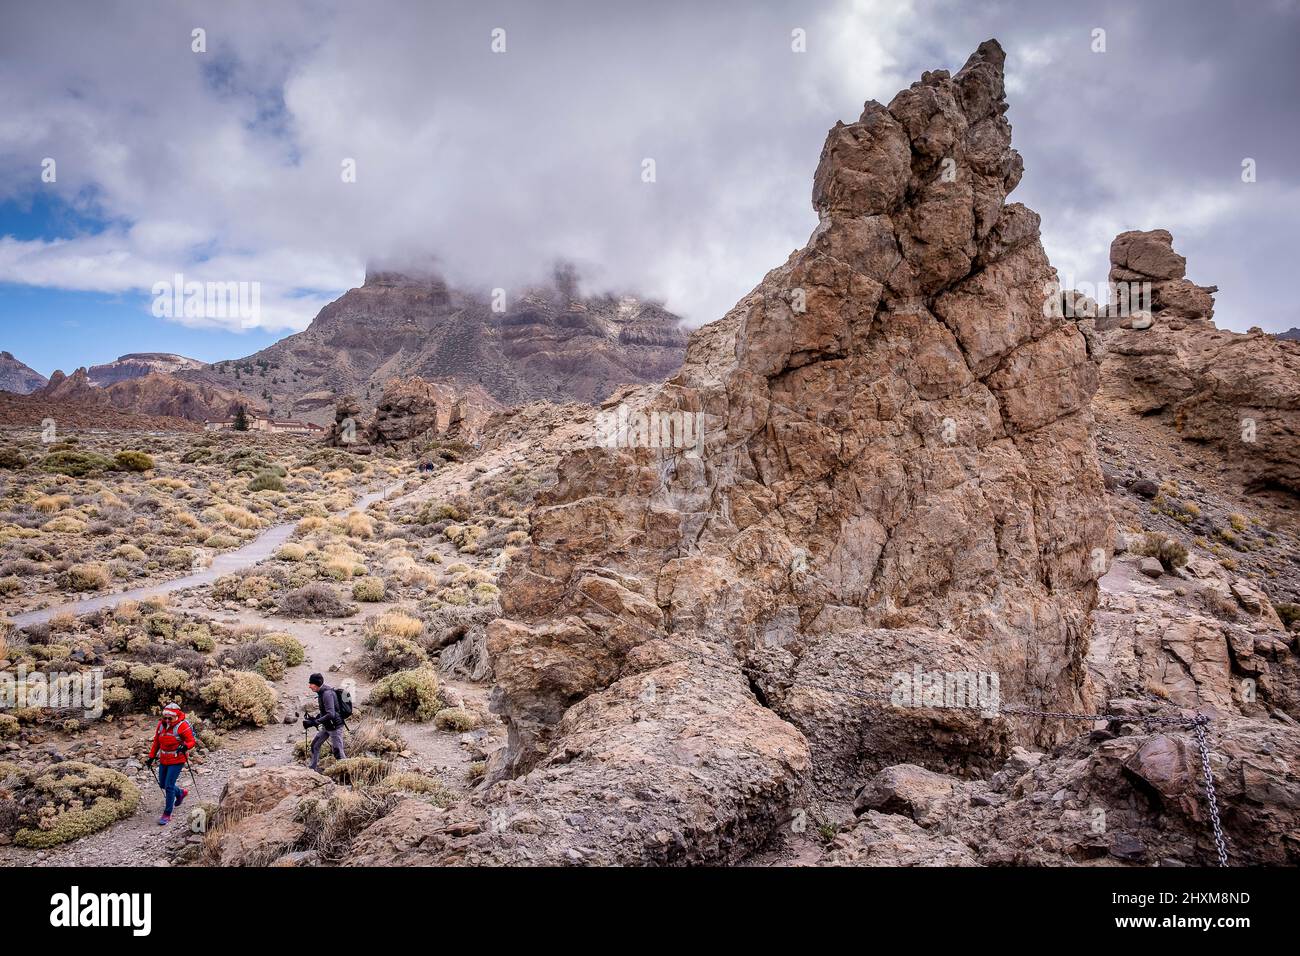 Los Roques de Garcia, volcanic rock formations in Teide national park, Tenerife, Canary Islands, Spain Stock Photo